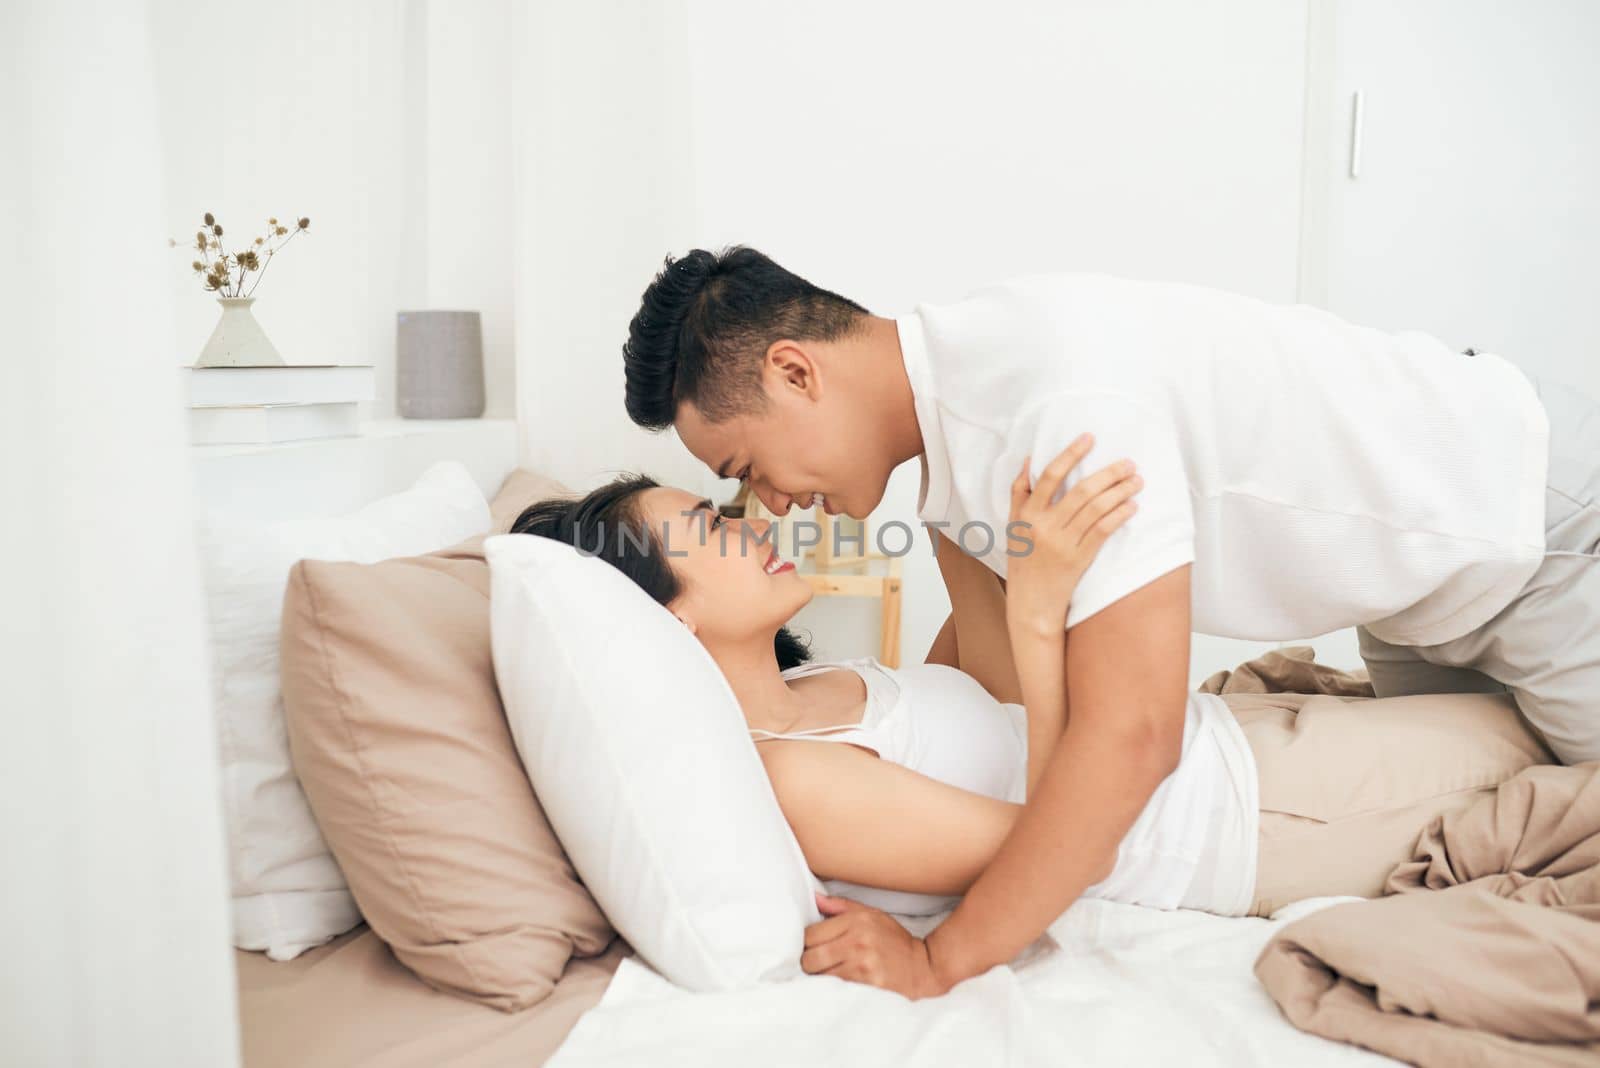 Side view of excited man is lying over woman in bed. They are looking at each other eyes and laughing